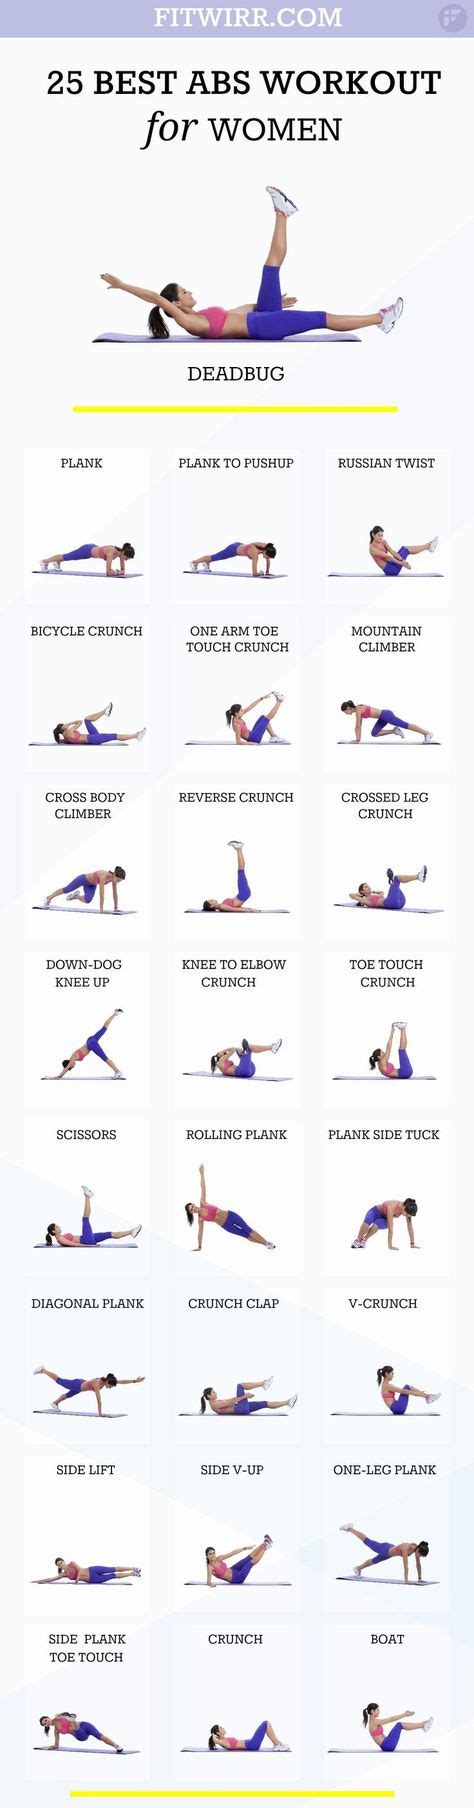 Floor Ab Exercises Ideas Abs Abs Workout At Home Workouts